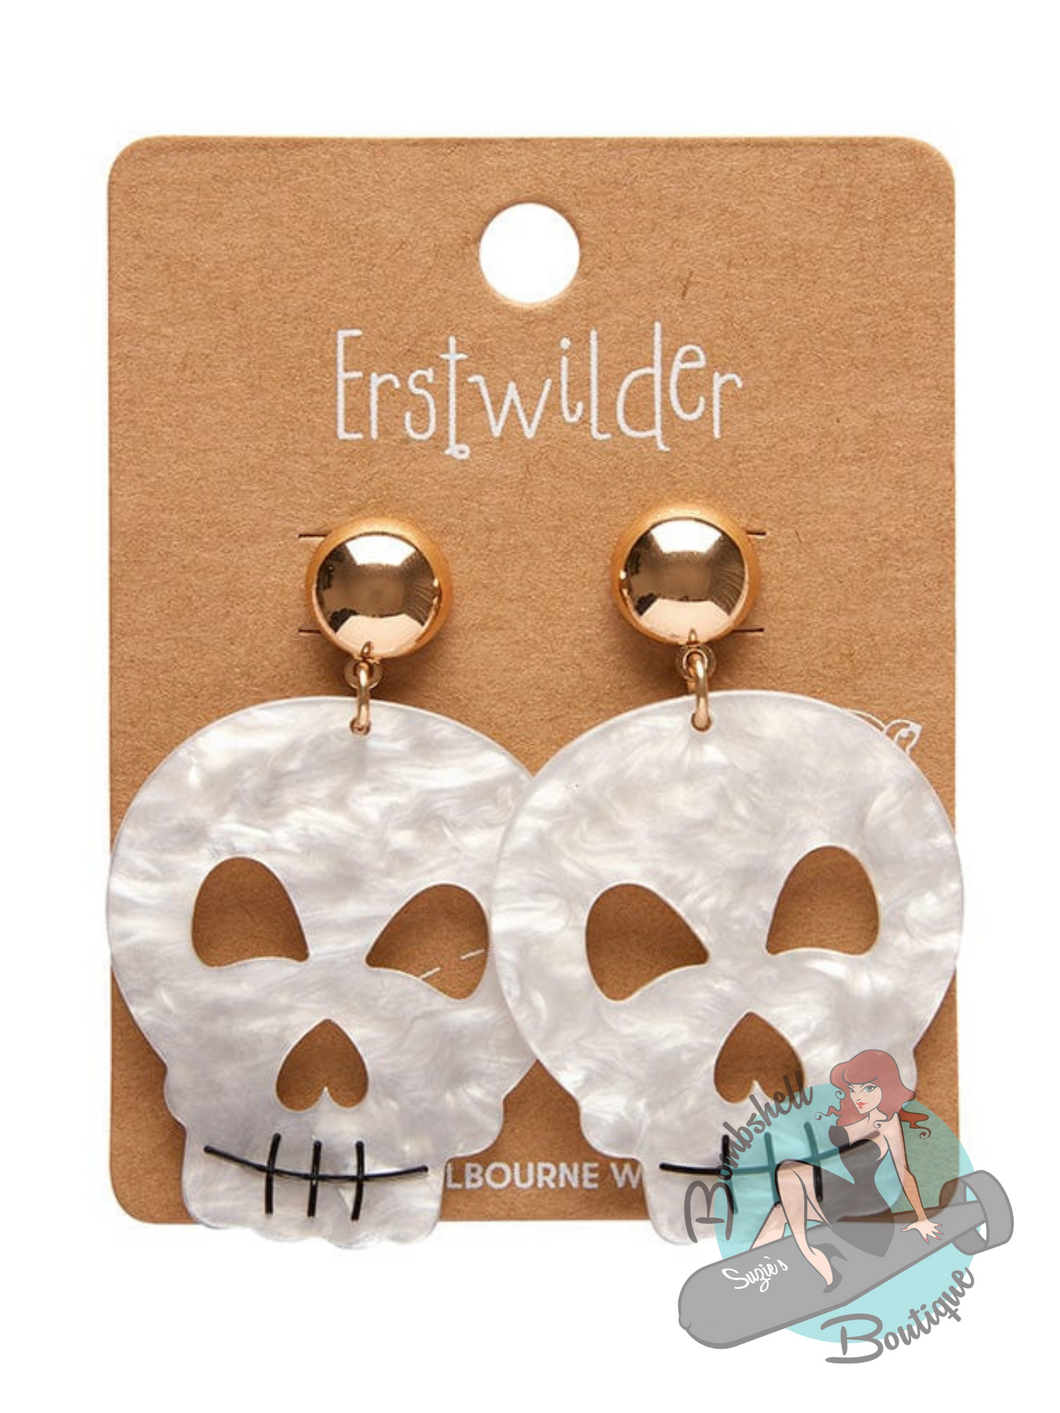 White Skull Earrings for goth clothing pin up styles.